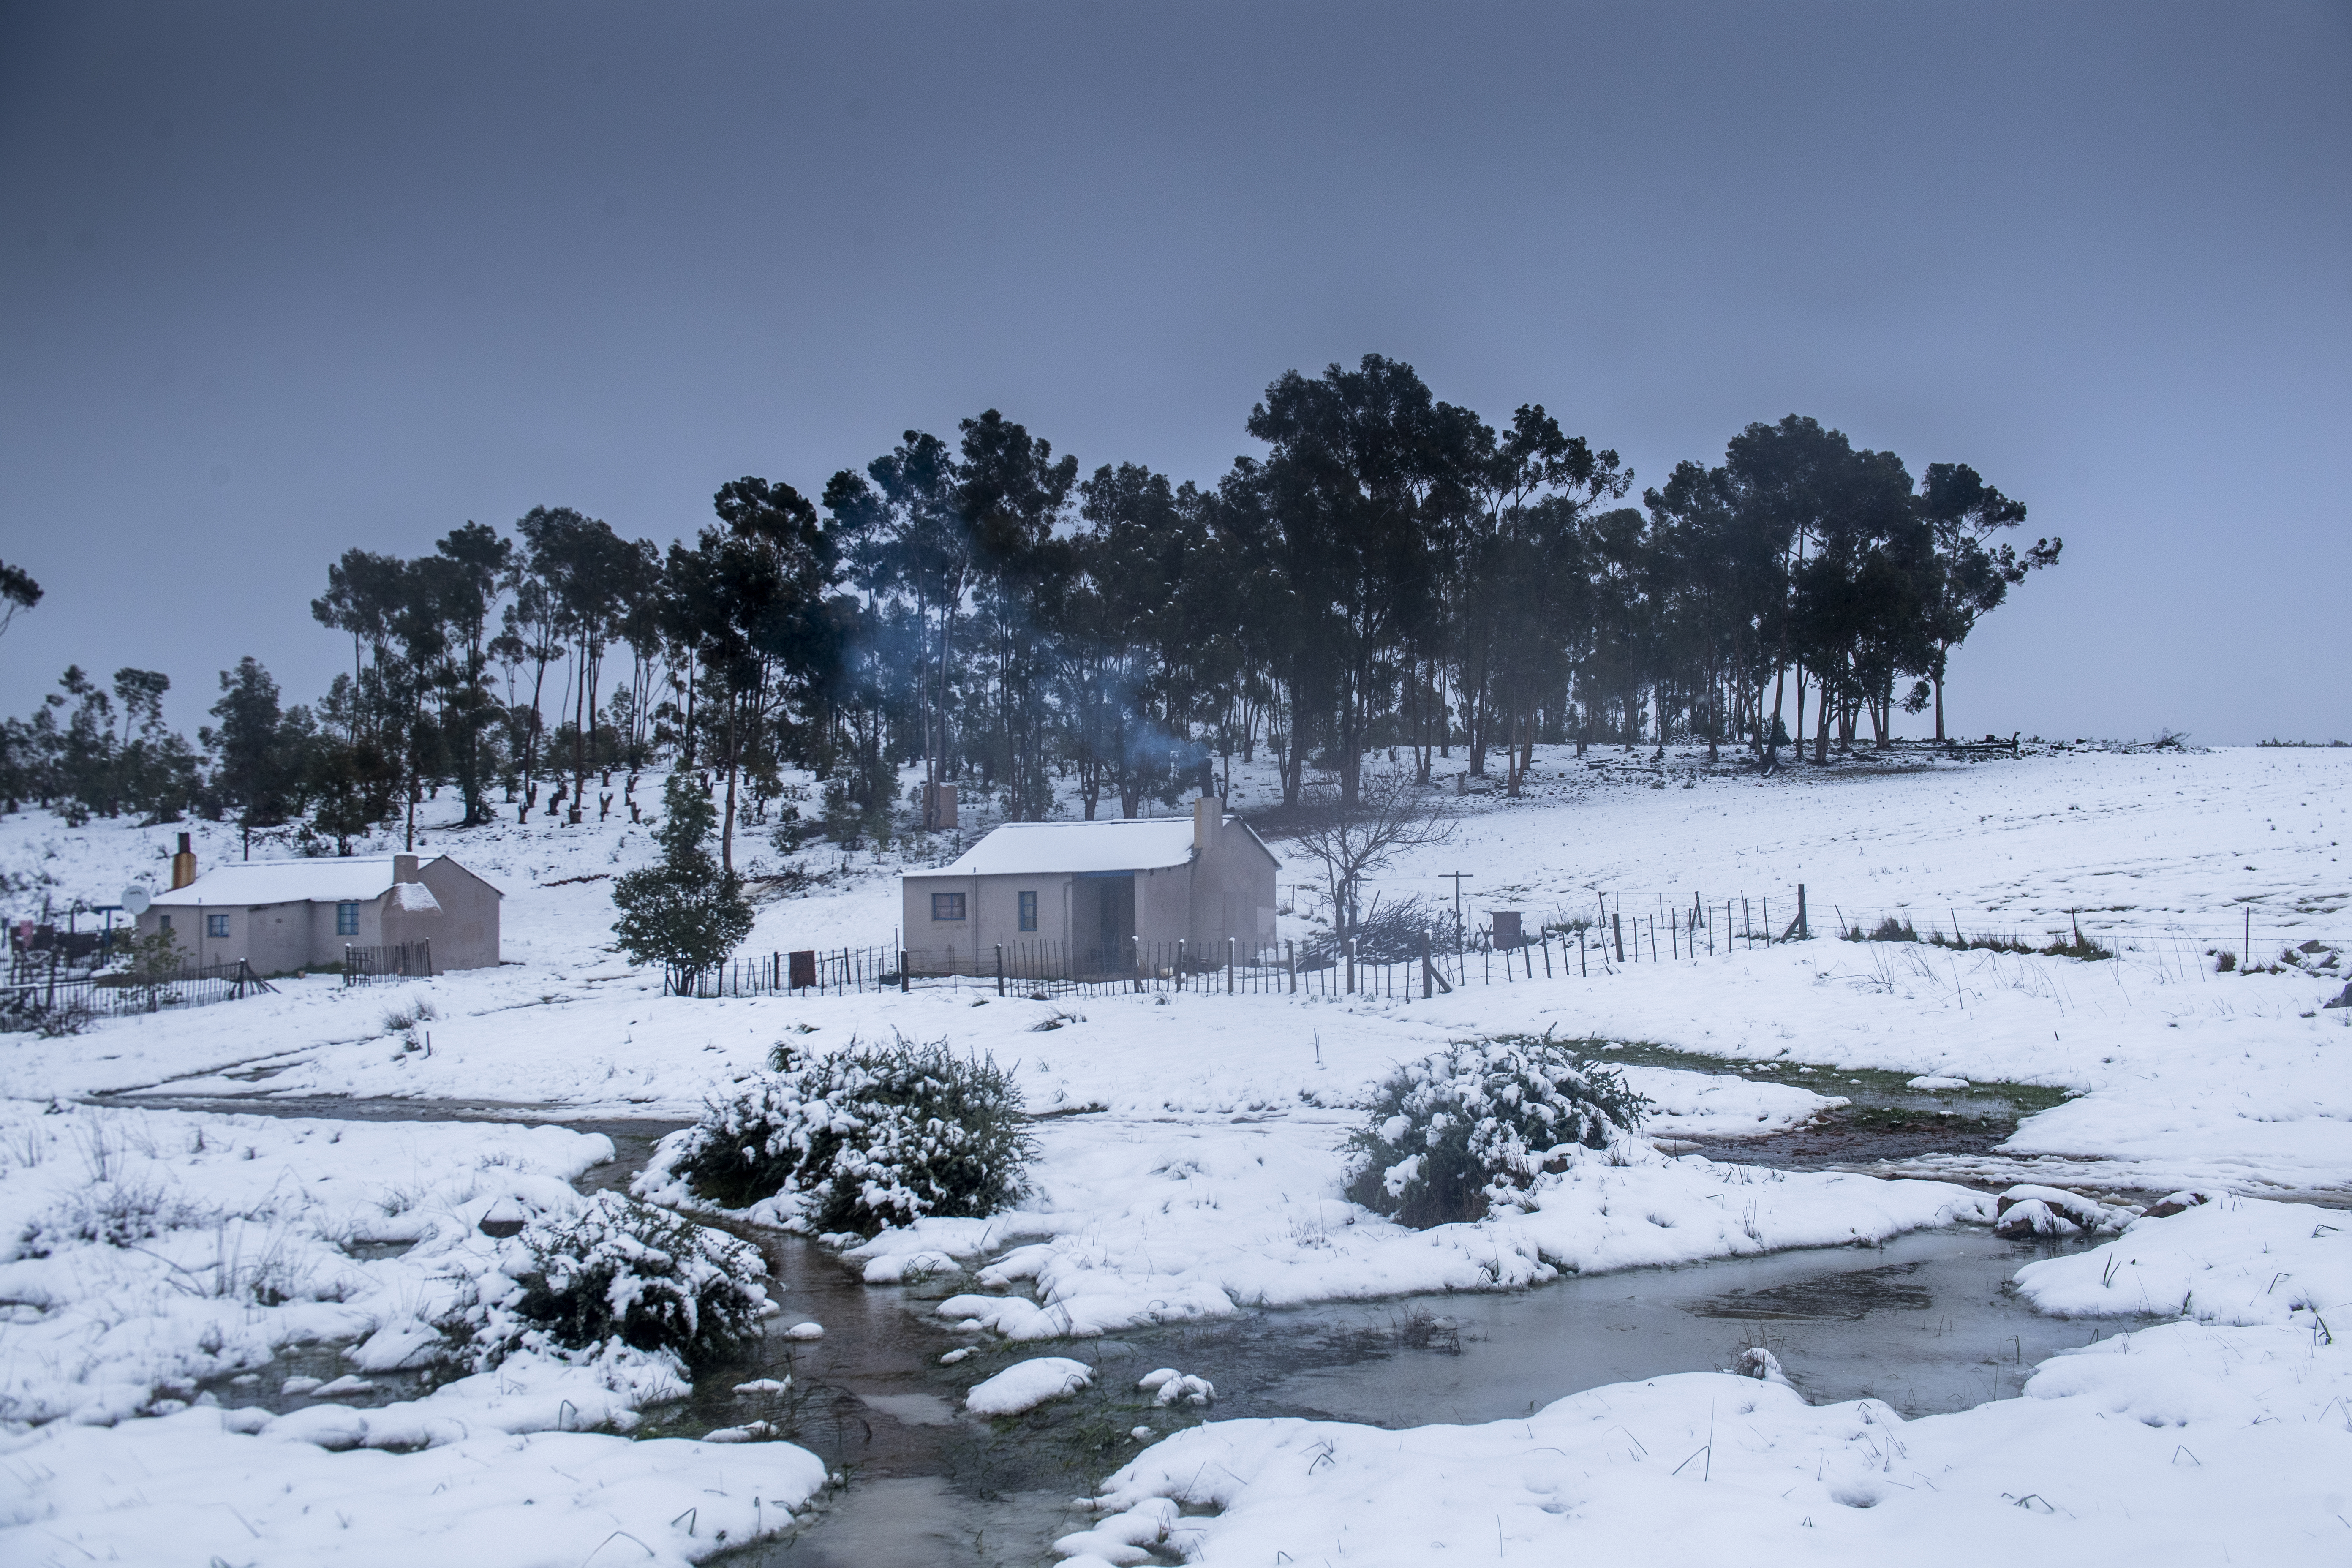 WESTERN CAPE, SOUTH AFRICA  JULY 02: A farm house at Bokkeveld during snow on July 02, 2018 in Western Cape, South Africa. Heavy snowfall in parts of the Western Cape led to closure of several mountain passes. According to the South African Weather Services, very cold conditions are expected across the country as a strong cold front approaches. (Photo by Gallo Images / Netwerk24 / Jaco Marais)